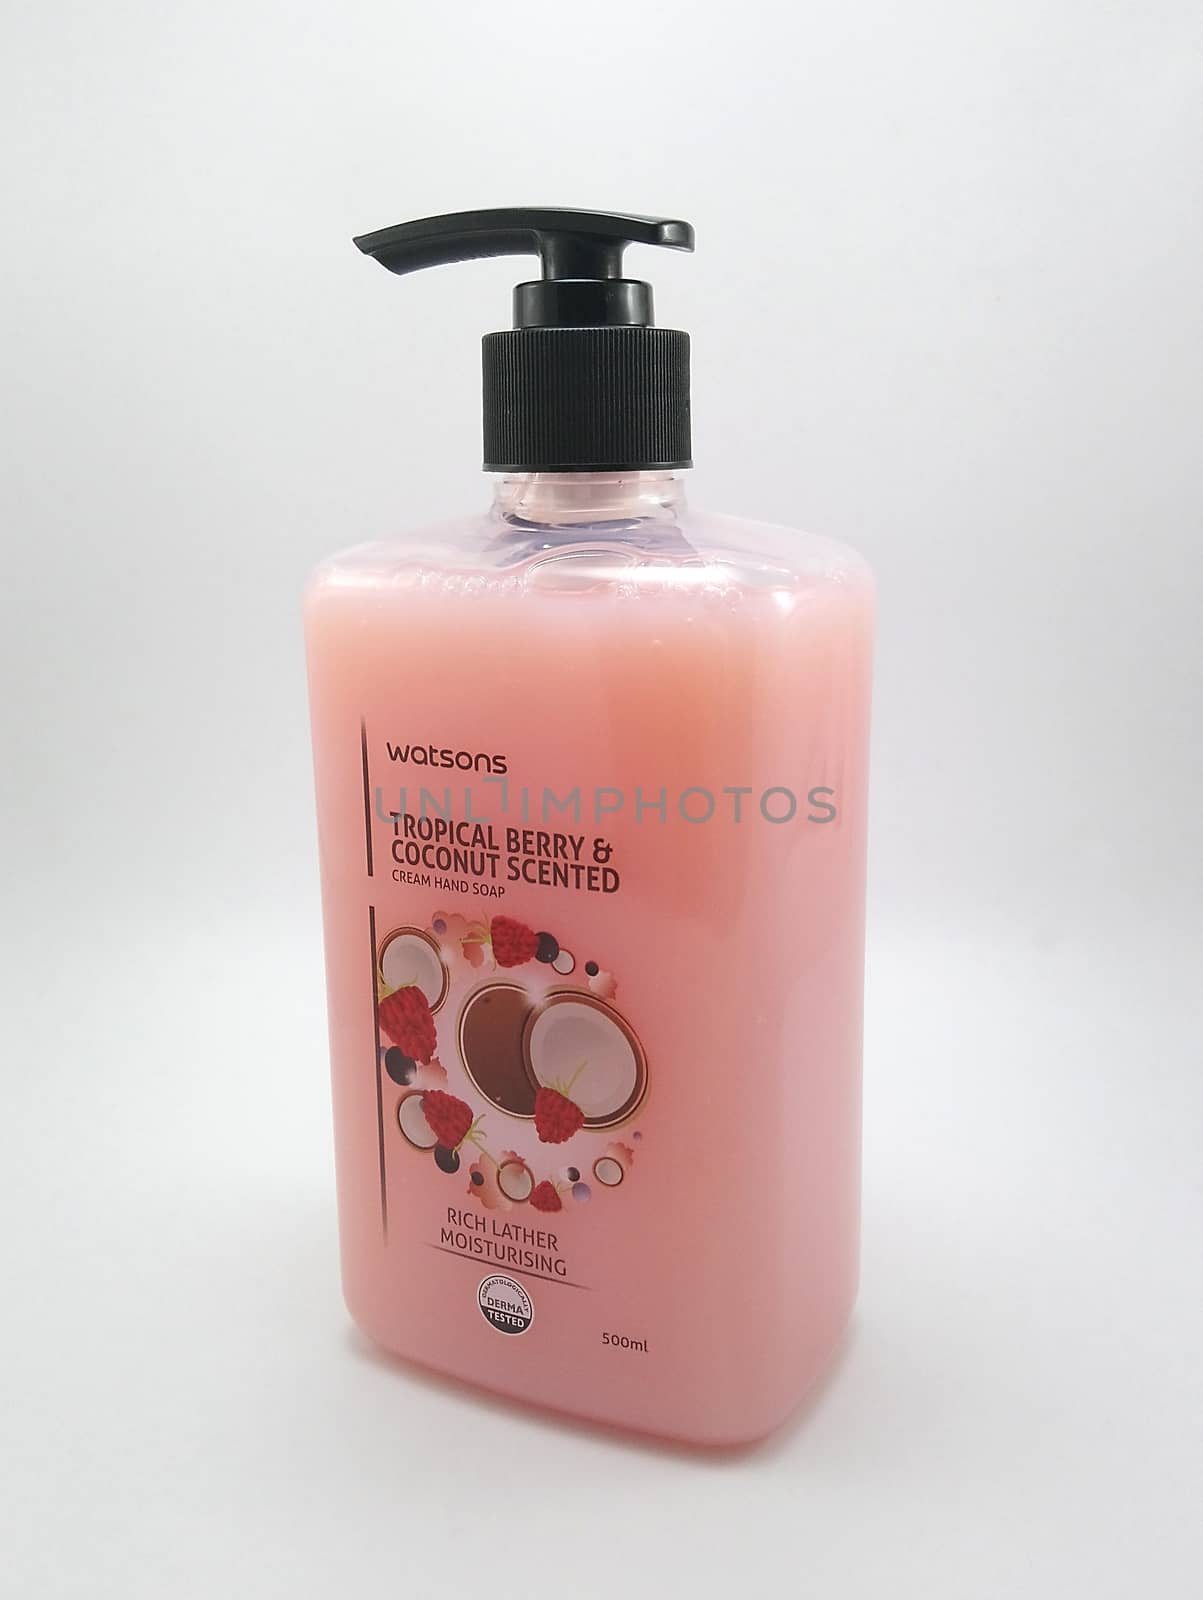 MANILA, PH - SEPT 25 - Watsons tropical berry and coconut scented cream liquid hand soap on September 25, 2020 in Manila, Philippines.